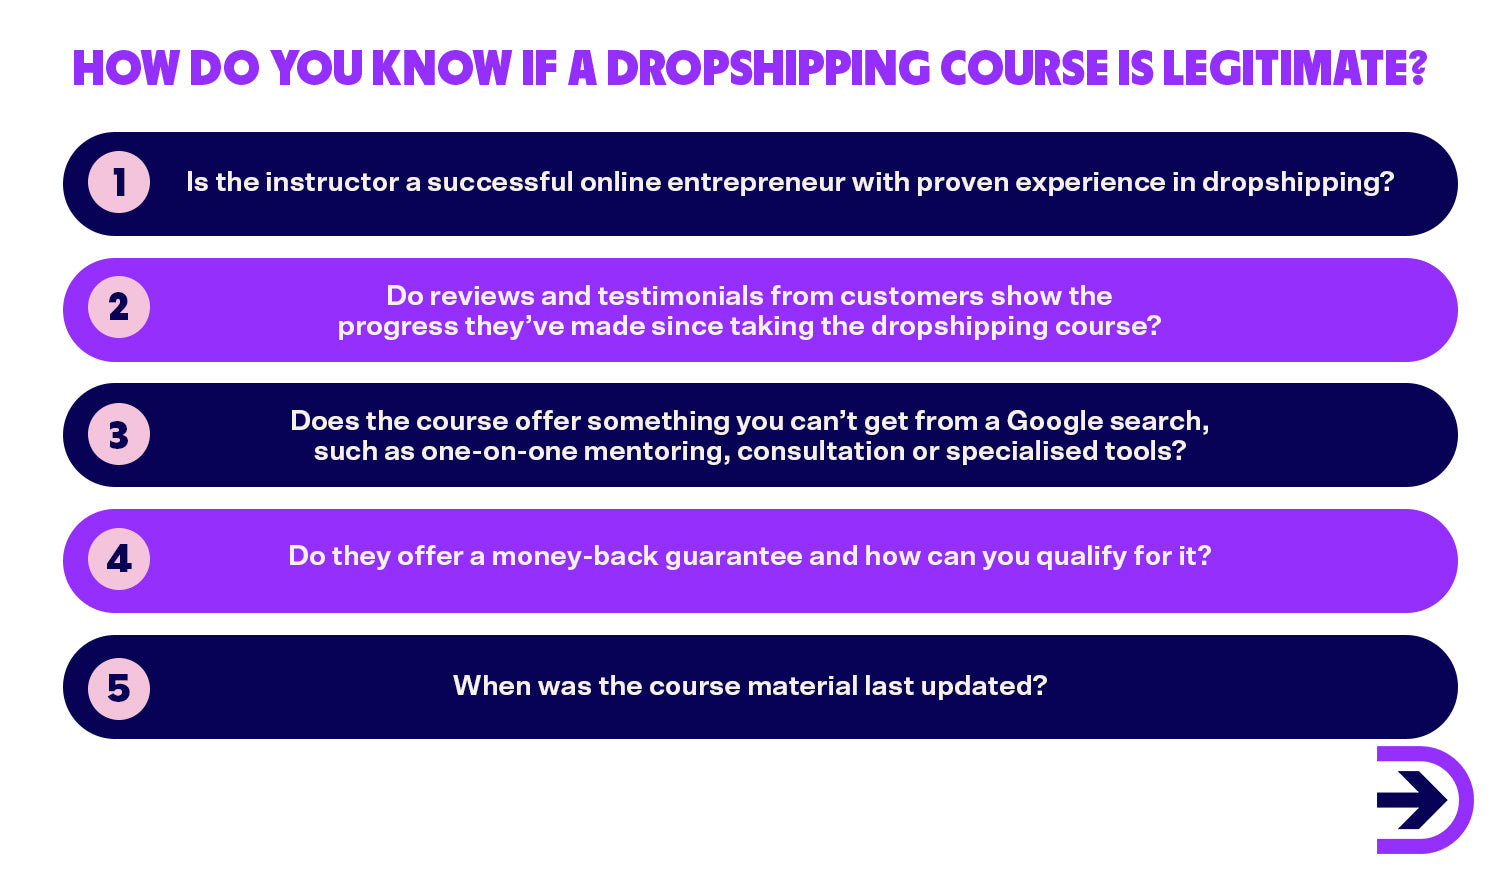 Ensure the dropshpping courses you undertake are legitimate and have multiple reviews and testimonials.